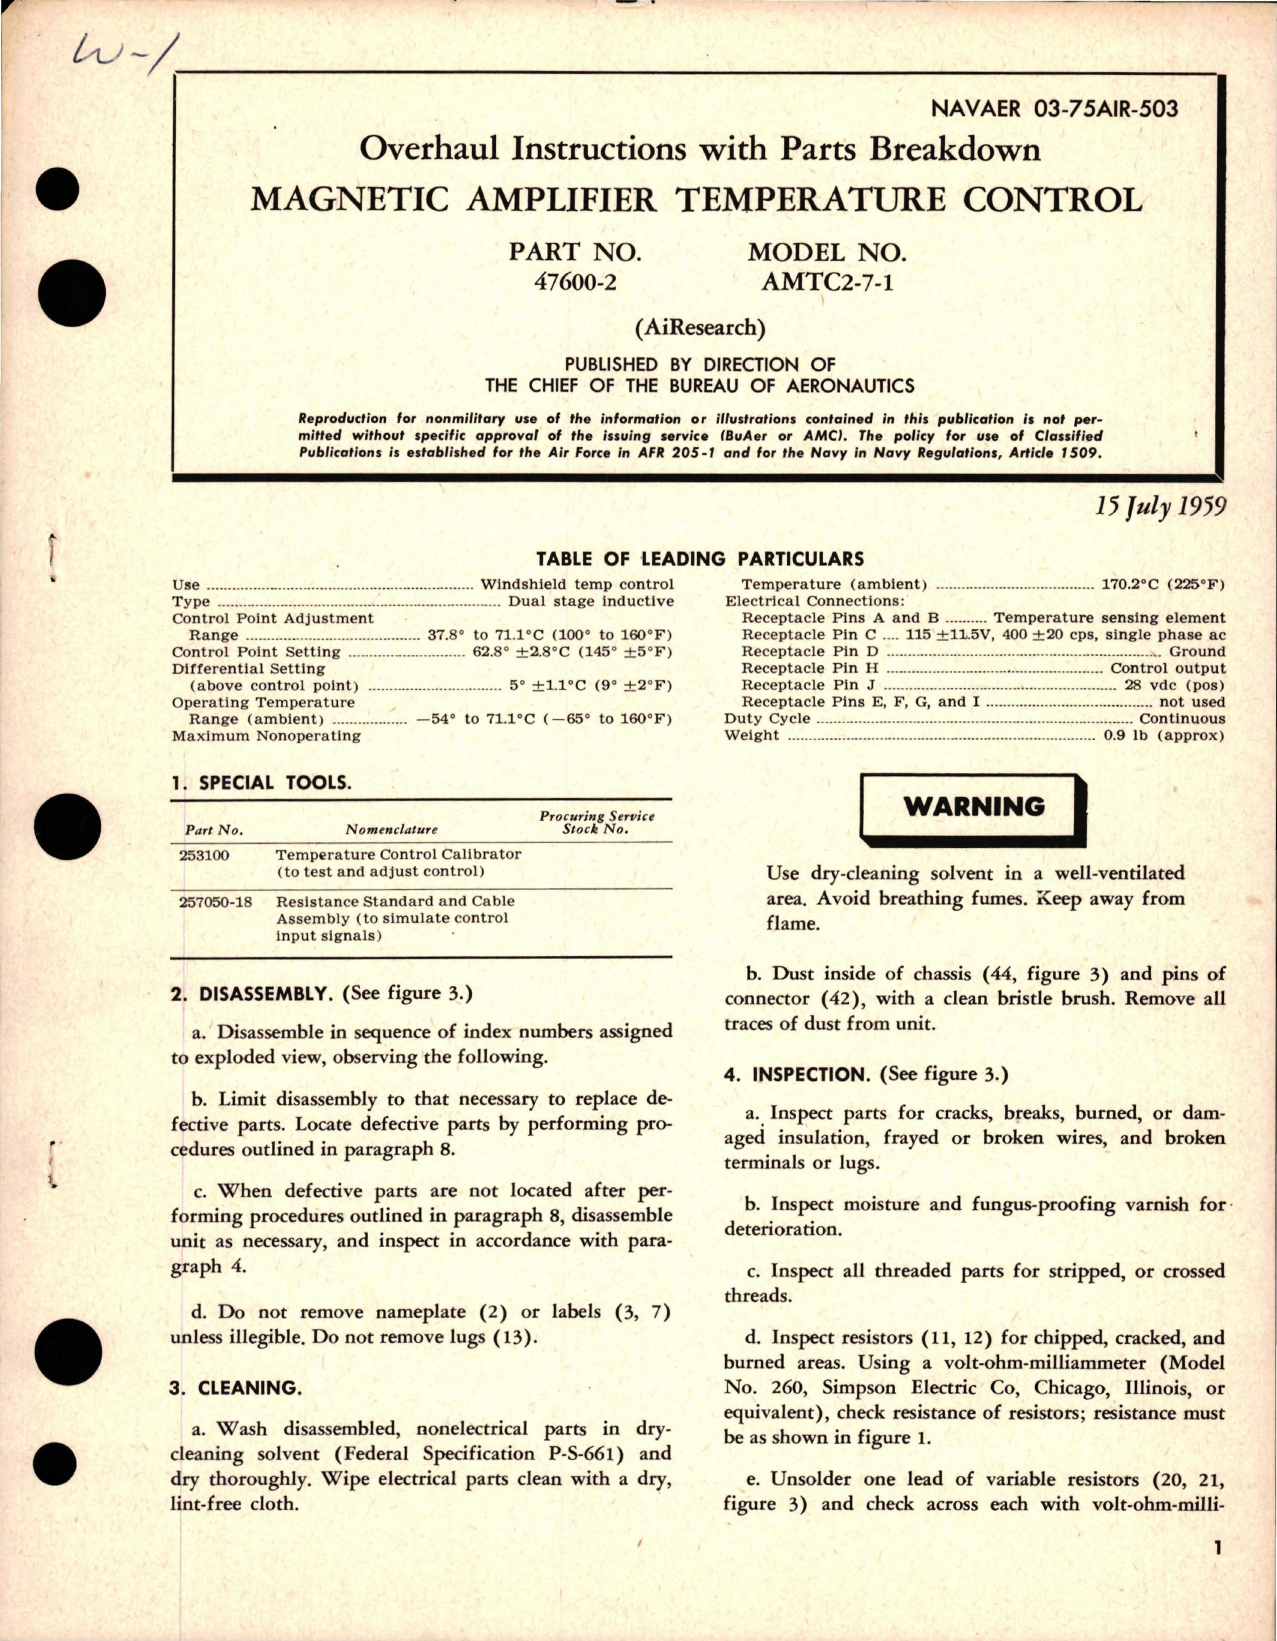 Sample page 1 from AirCorps Library document: Oveerhaul Instructions for Parts Breakdown for Magnetic Amplifier Temperature Control - Part 47600-2 - Model AMTC2-7-1